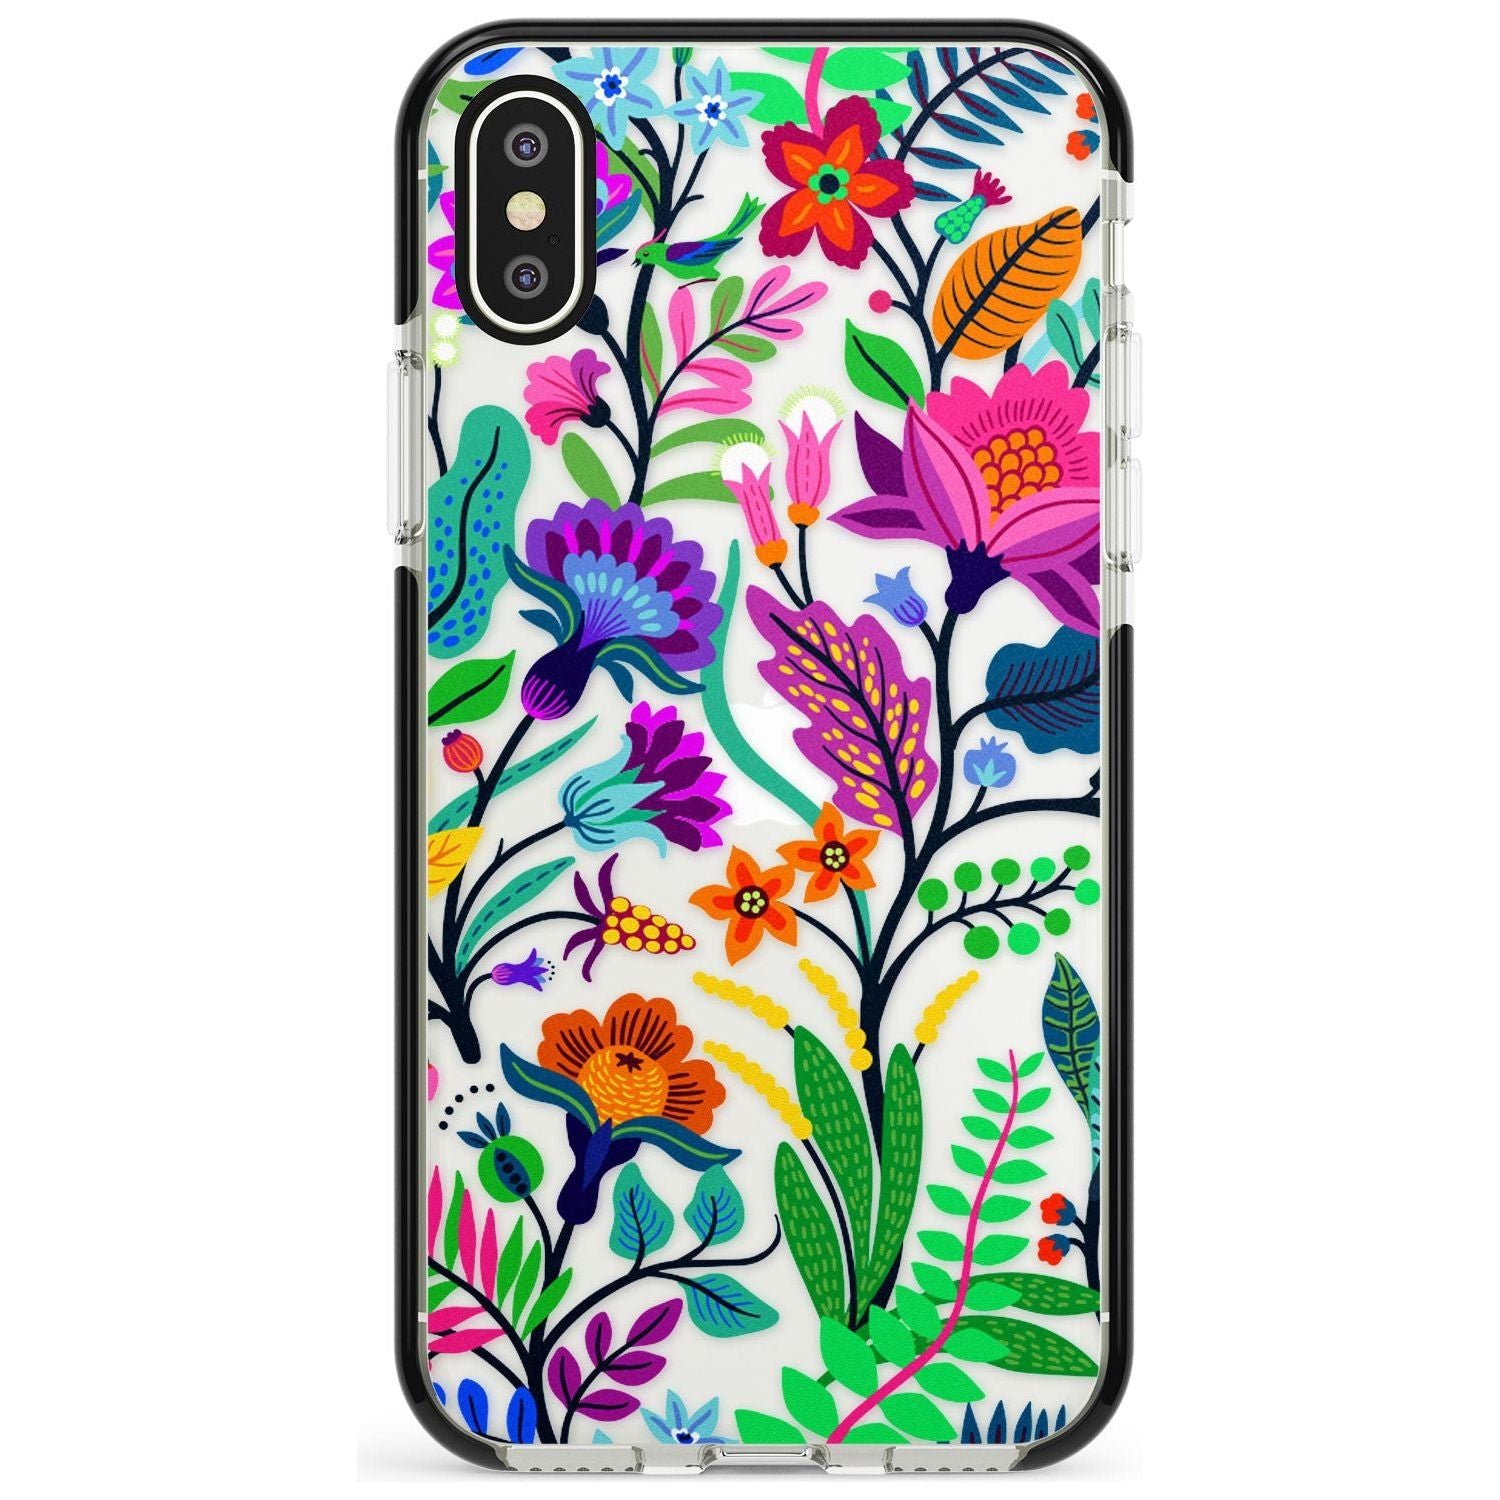 Floral Vibe Black Impact Phone Case for iPhone X XS Max XR